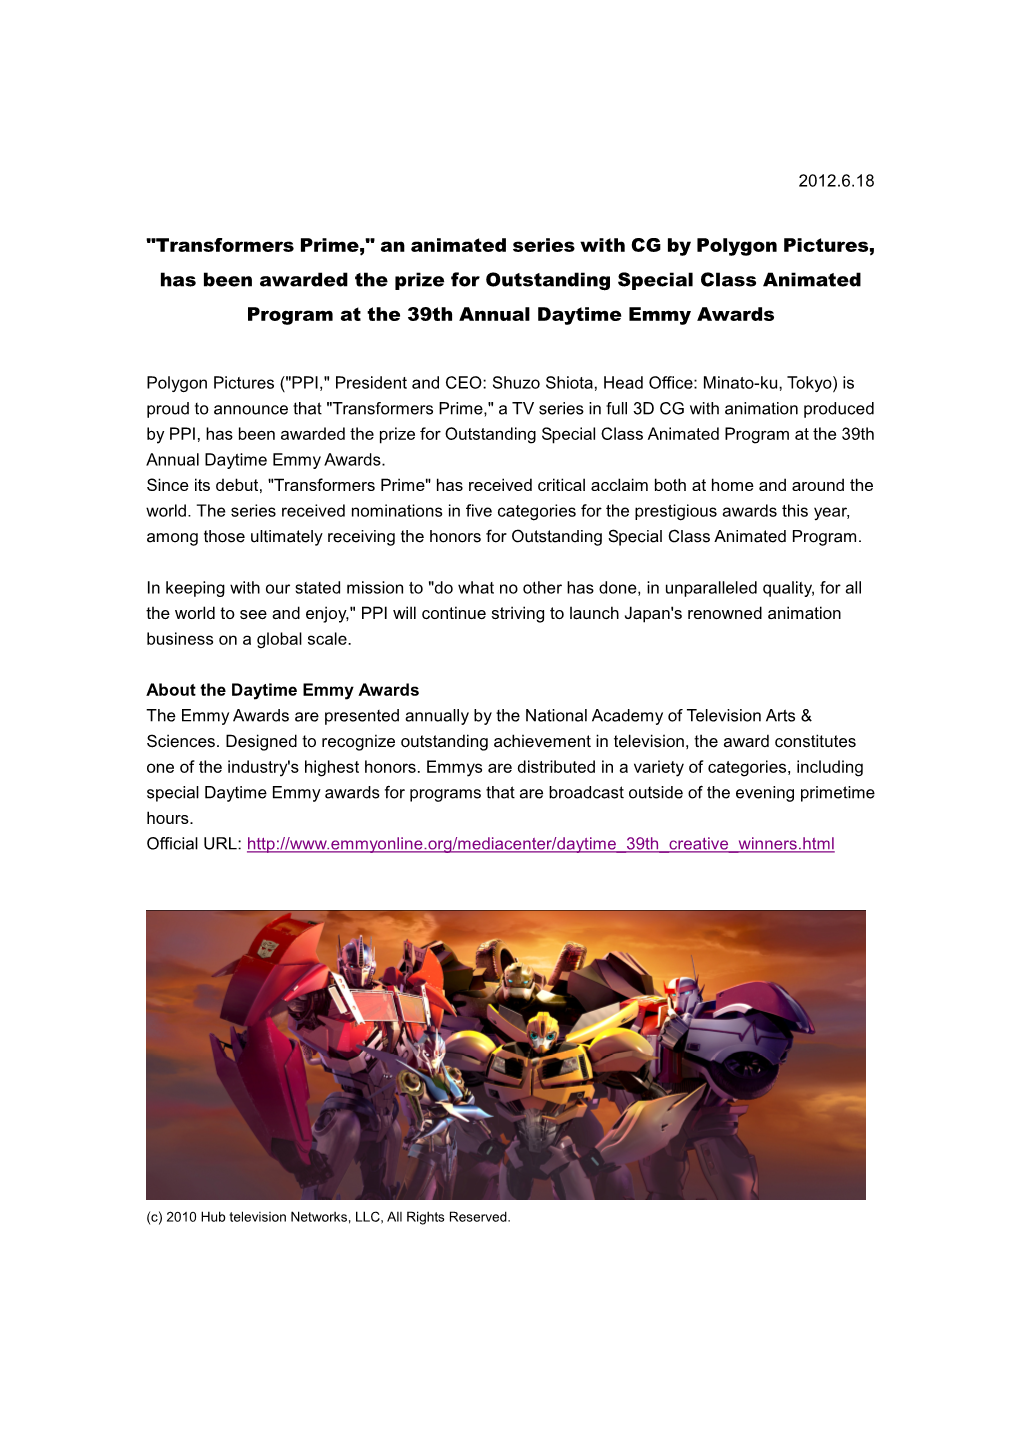 "Transformers Prime," an Animated Series with CG by Polygon Pictures